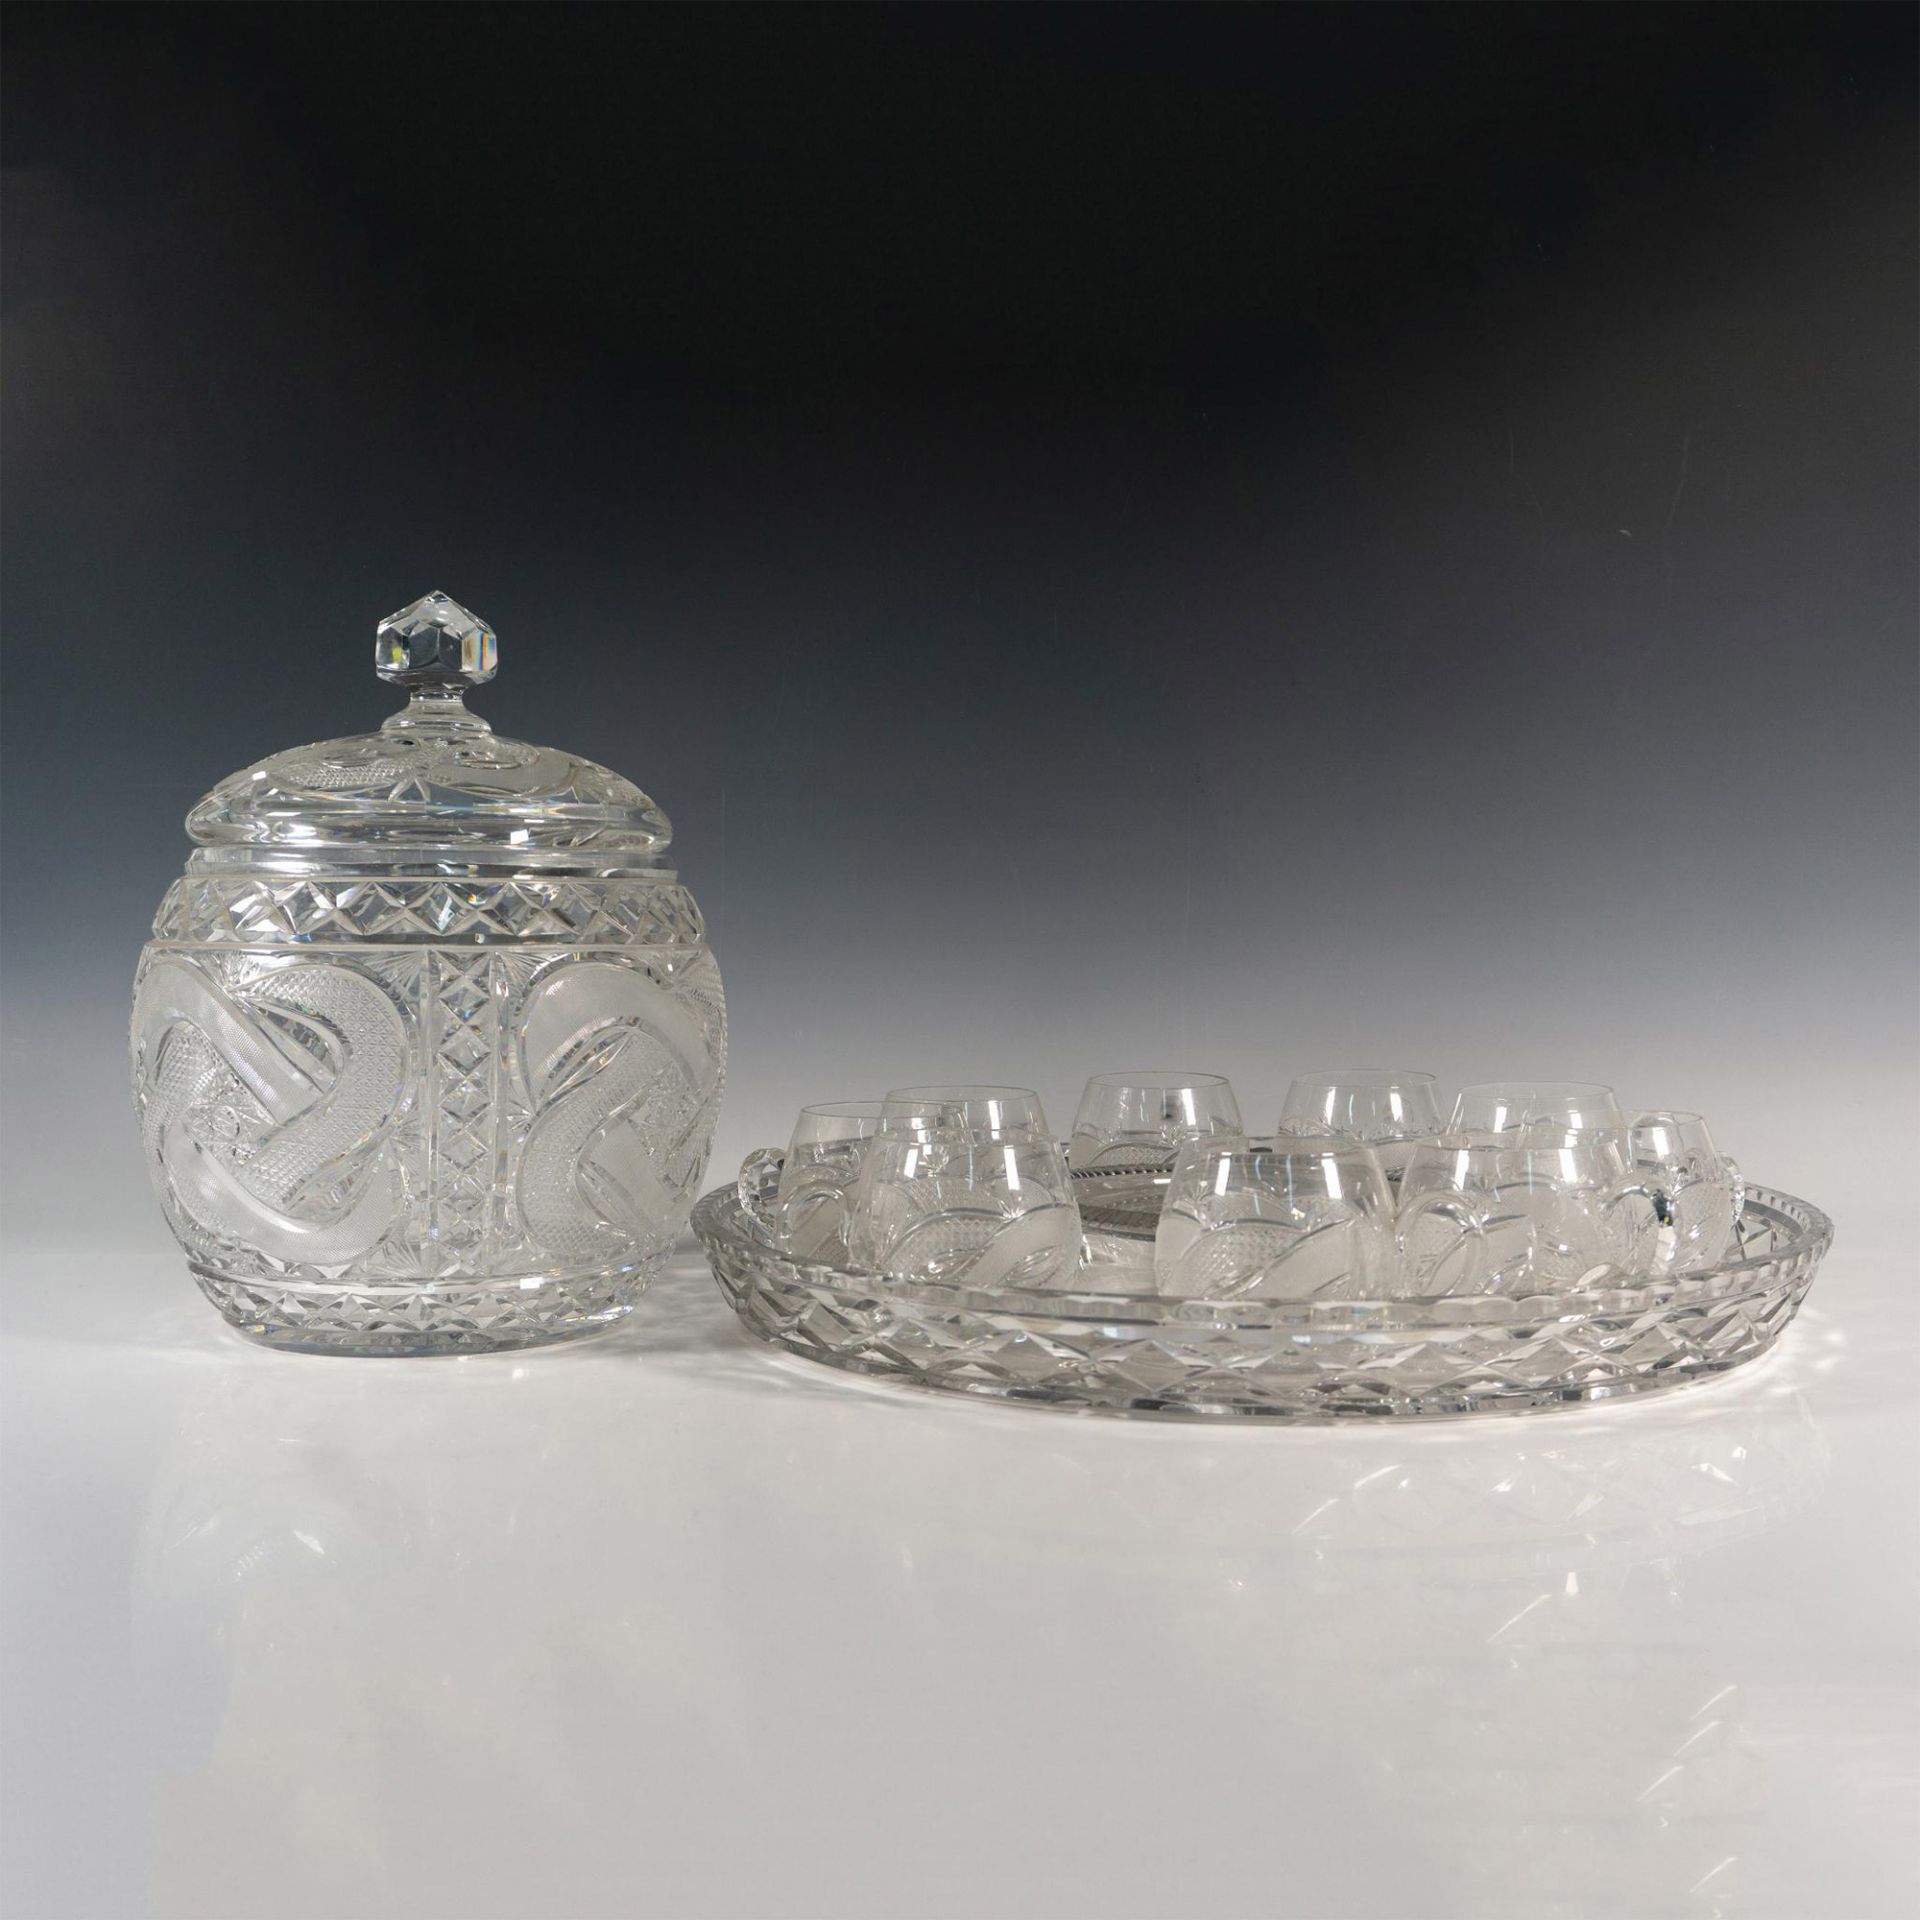 11pc Cut Crystal Lidded Punch Bowl, Tray & Cups Set